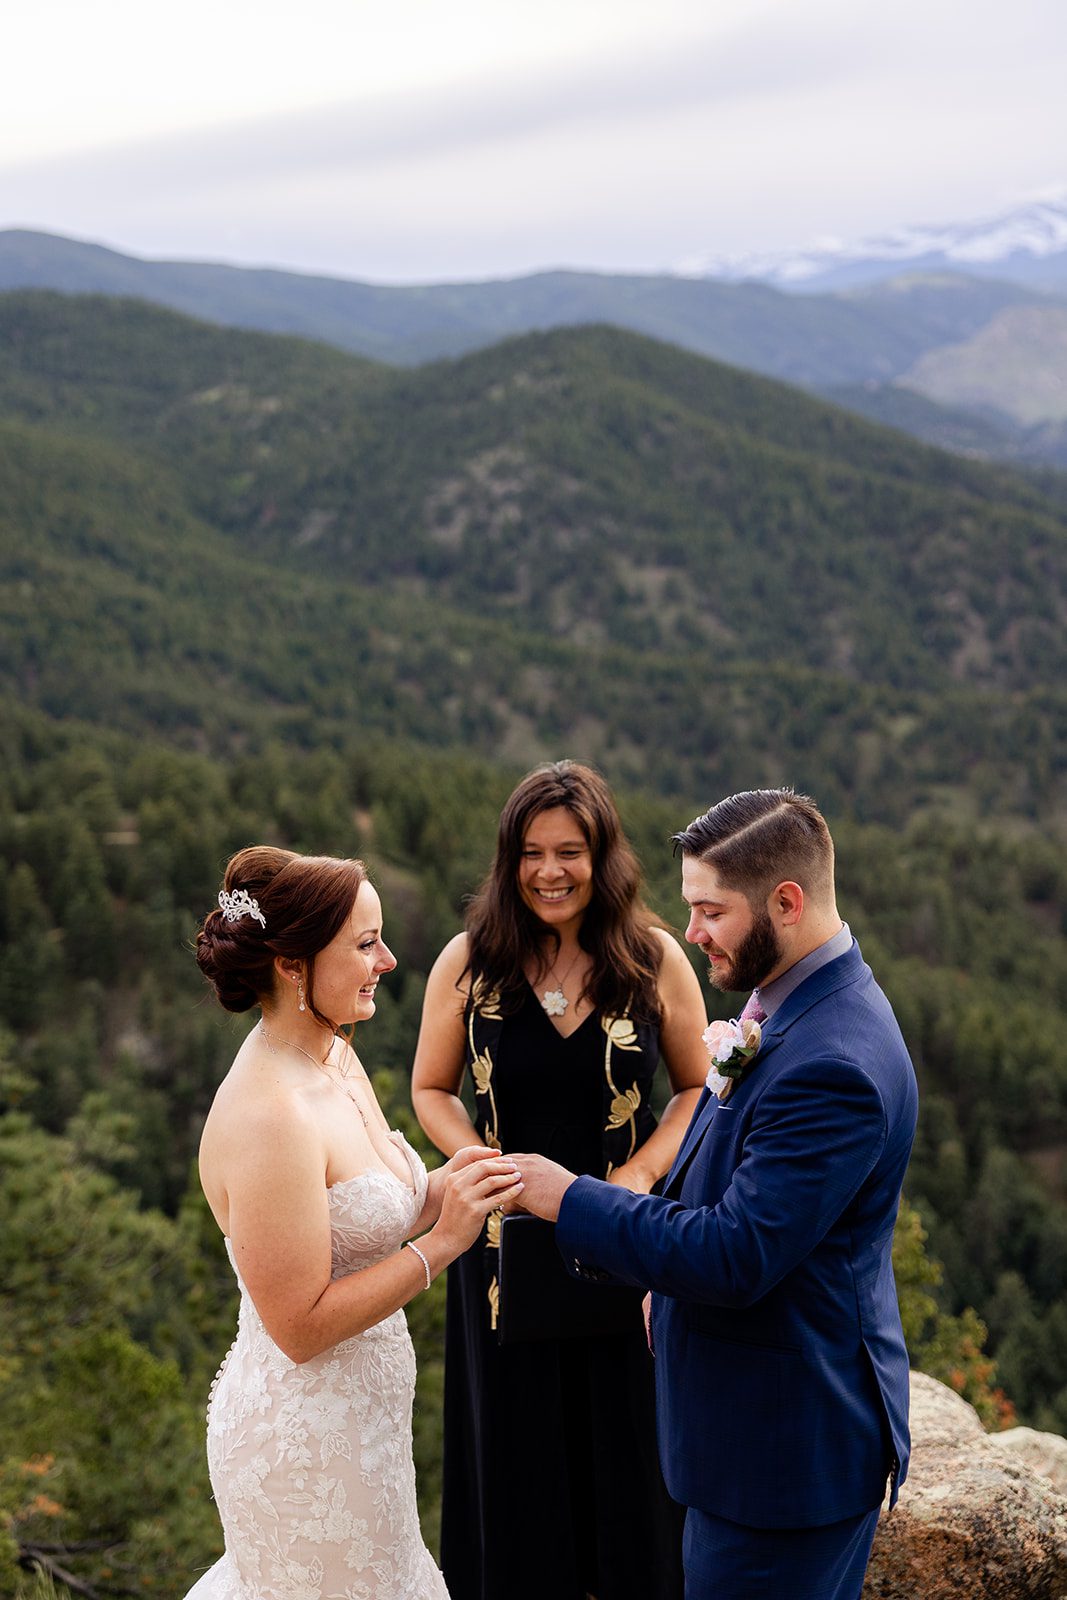 Bride puts the ring on her grooms hand during their ceremony at their Boulder elopement with videography.